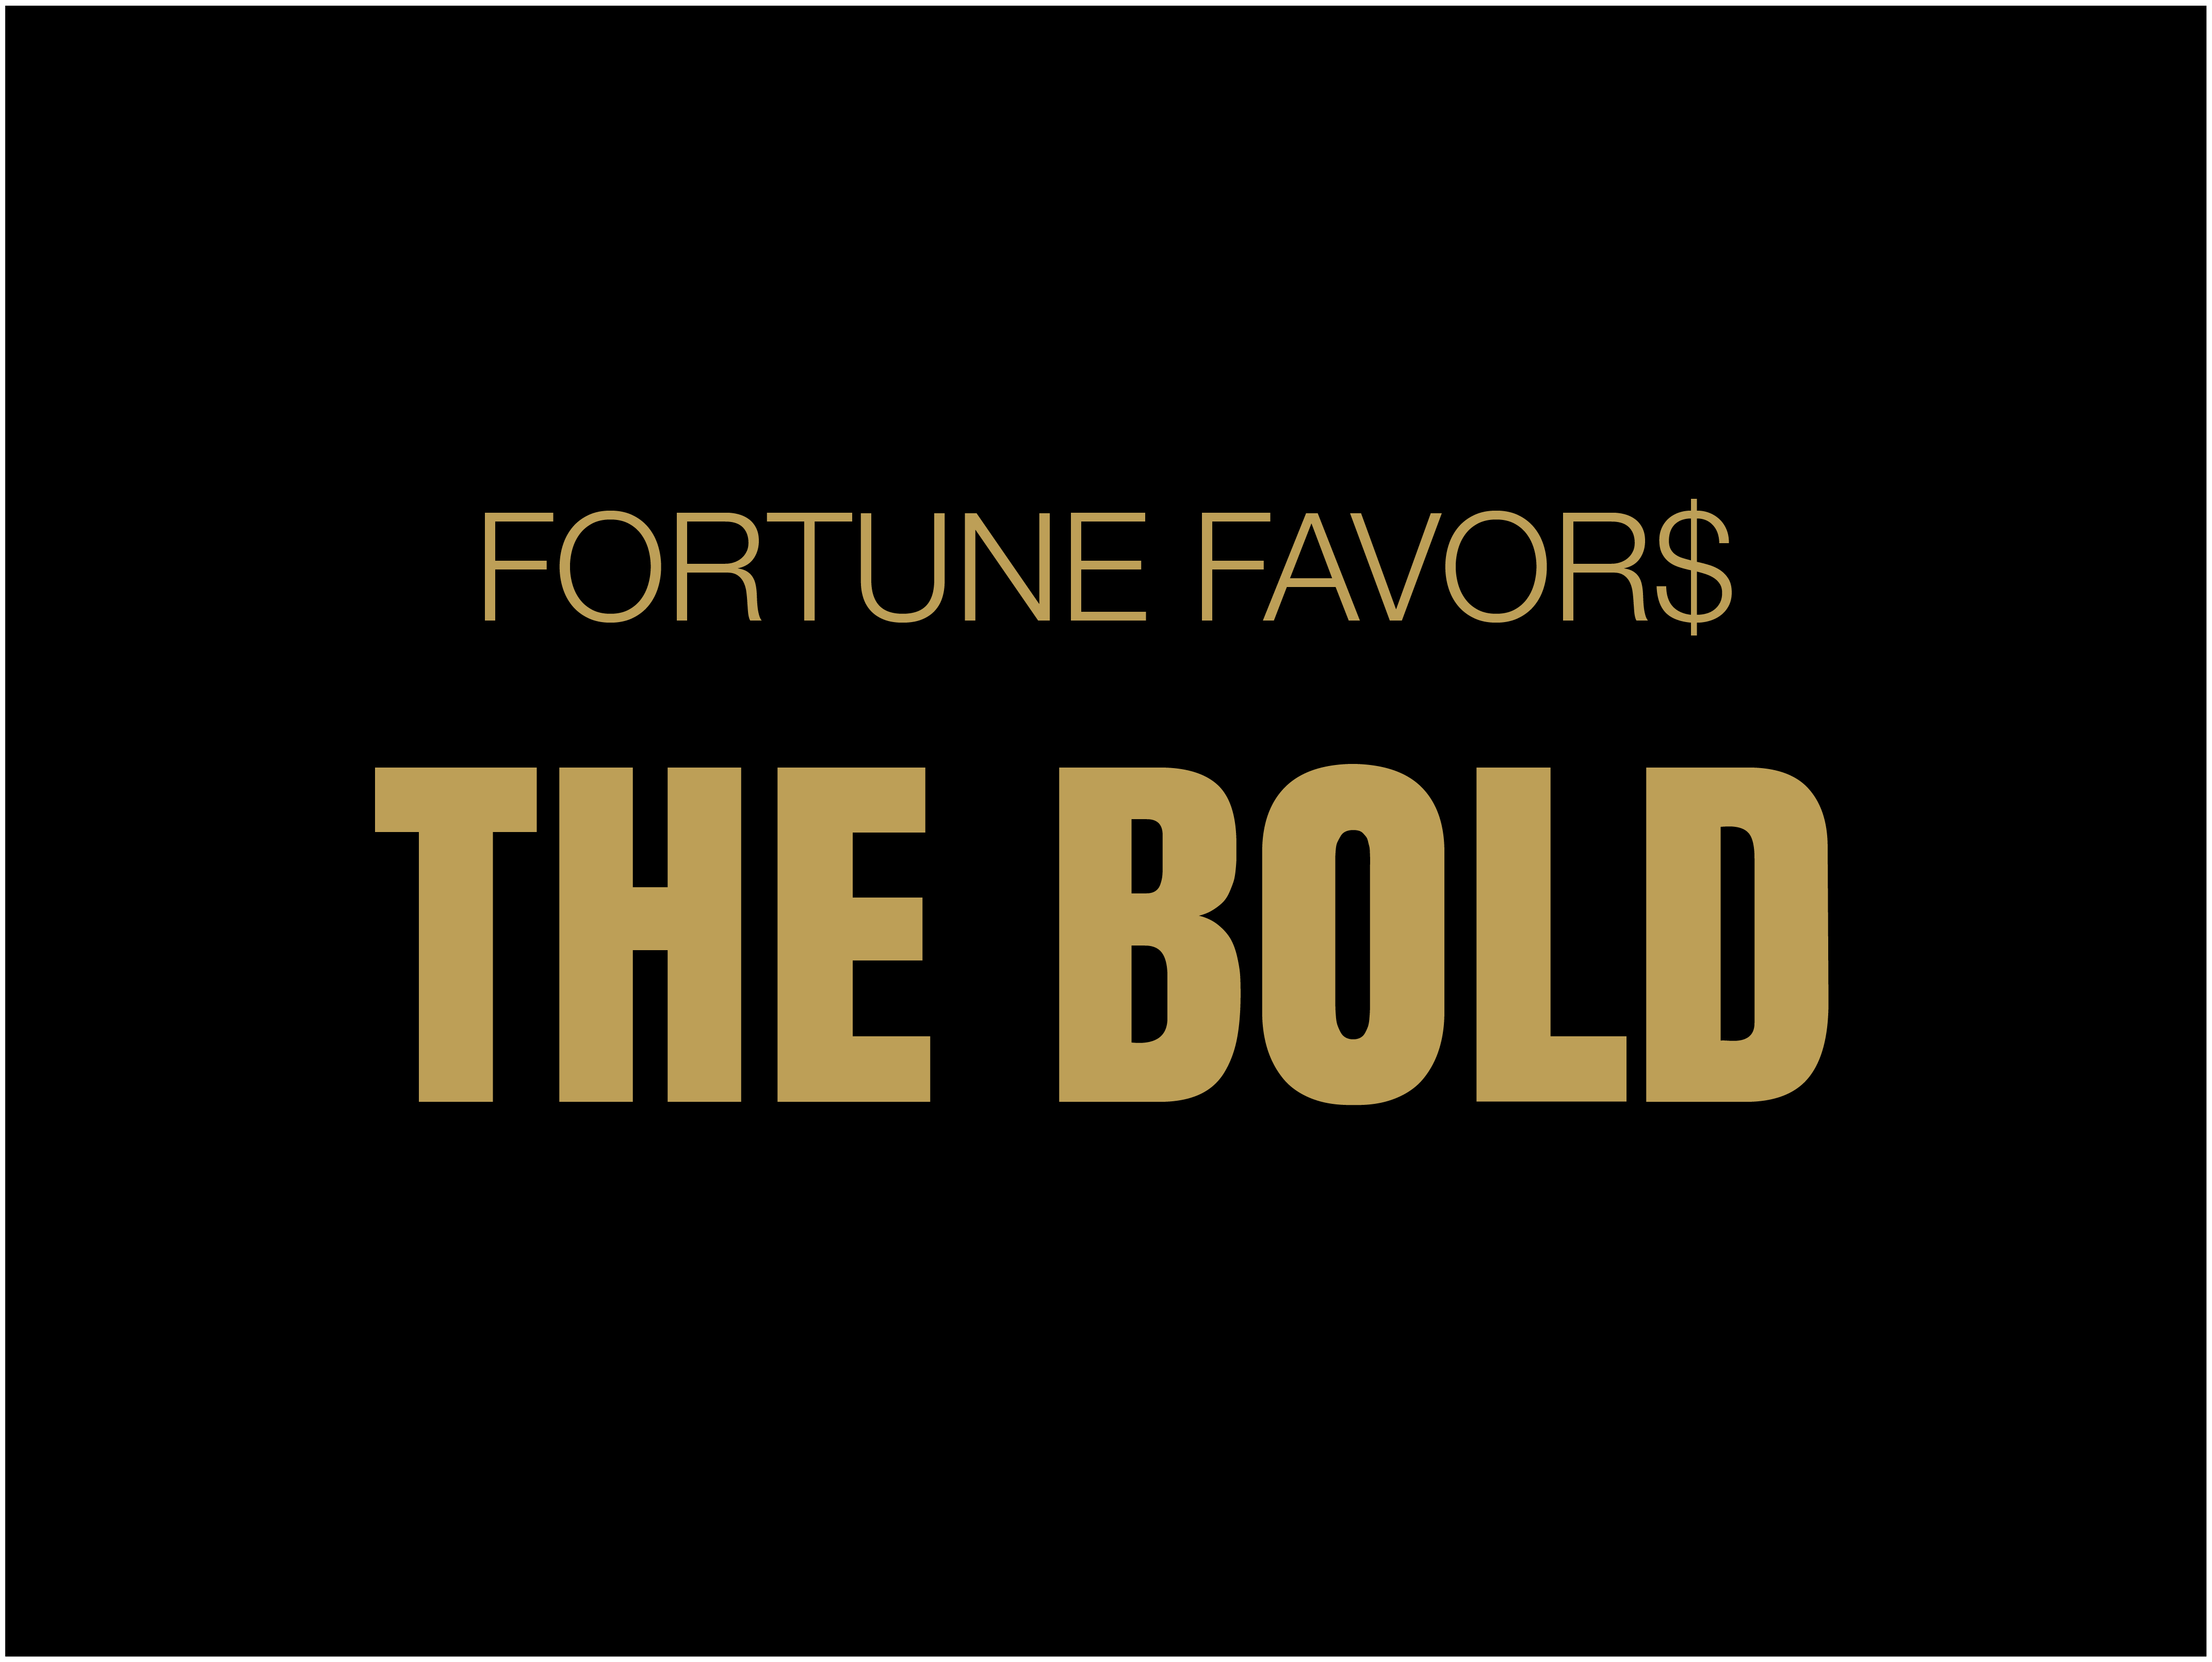 is the saying fortune favors the brave or the bold